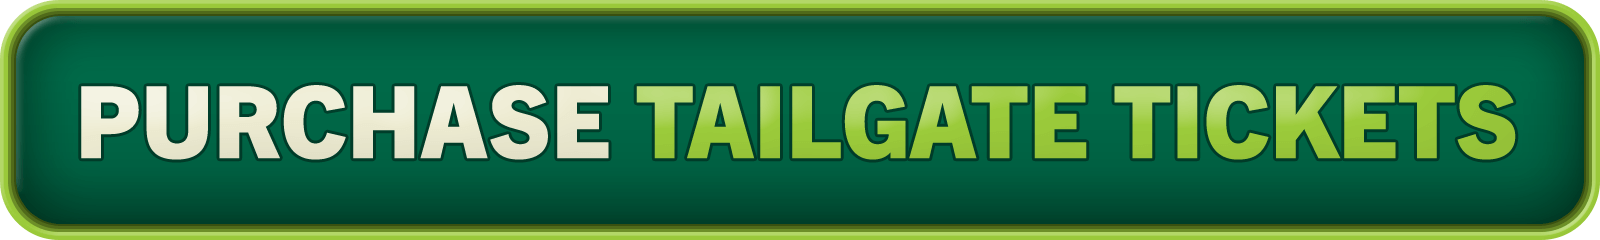 purchase tailgate tickets